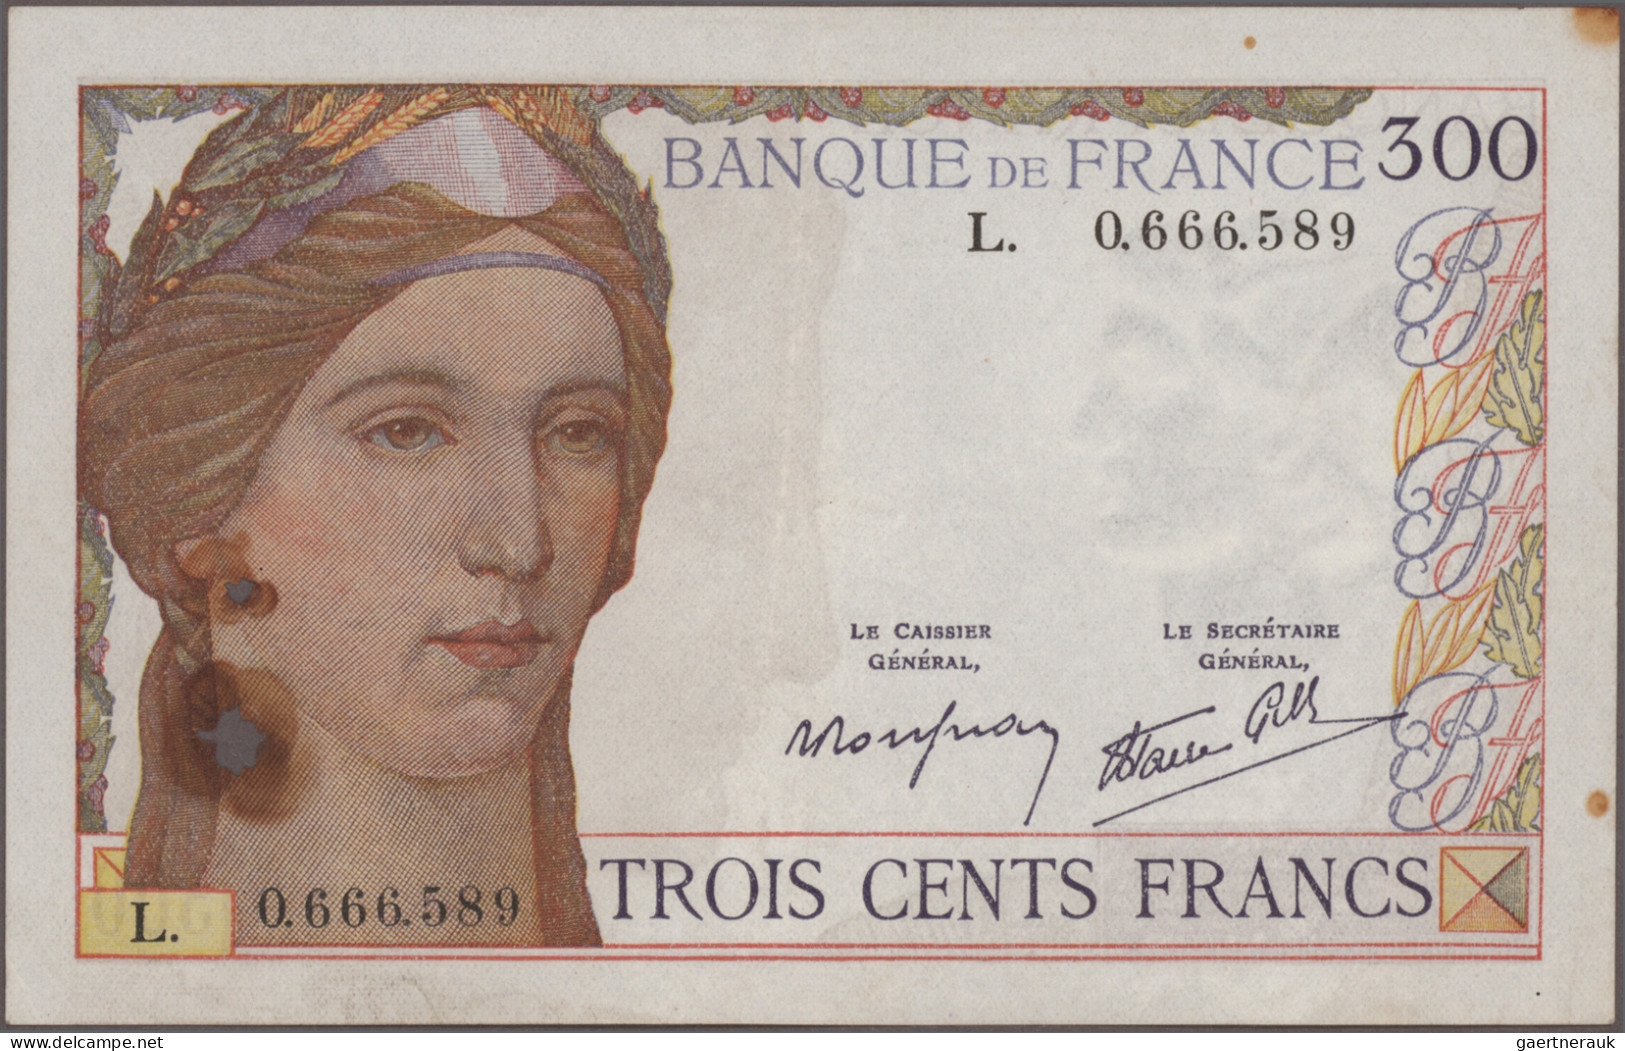 France: Banque De France, Very Nice Lot With 10 Banknotes, 1937-1941 Series, Wit - 1955-1959 Aufdrucke Neue Francs